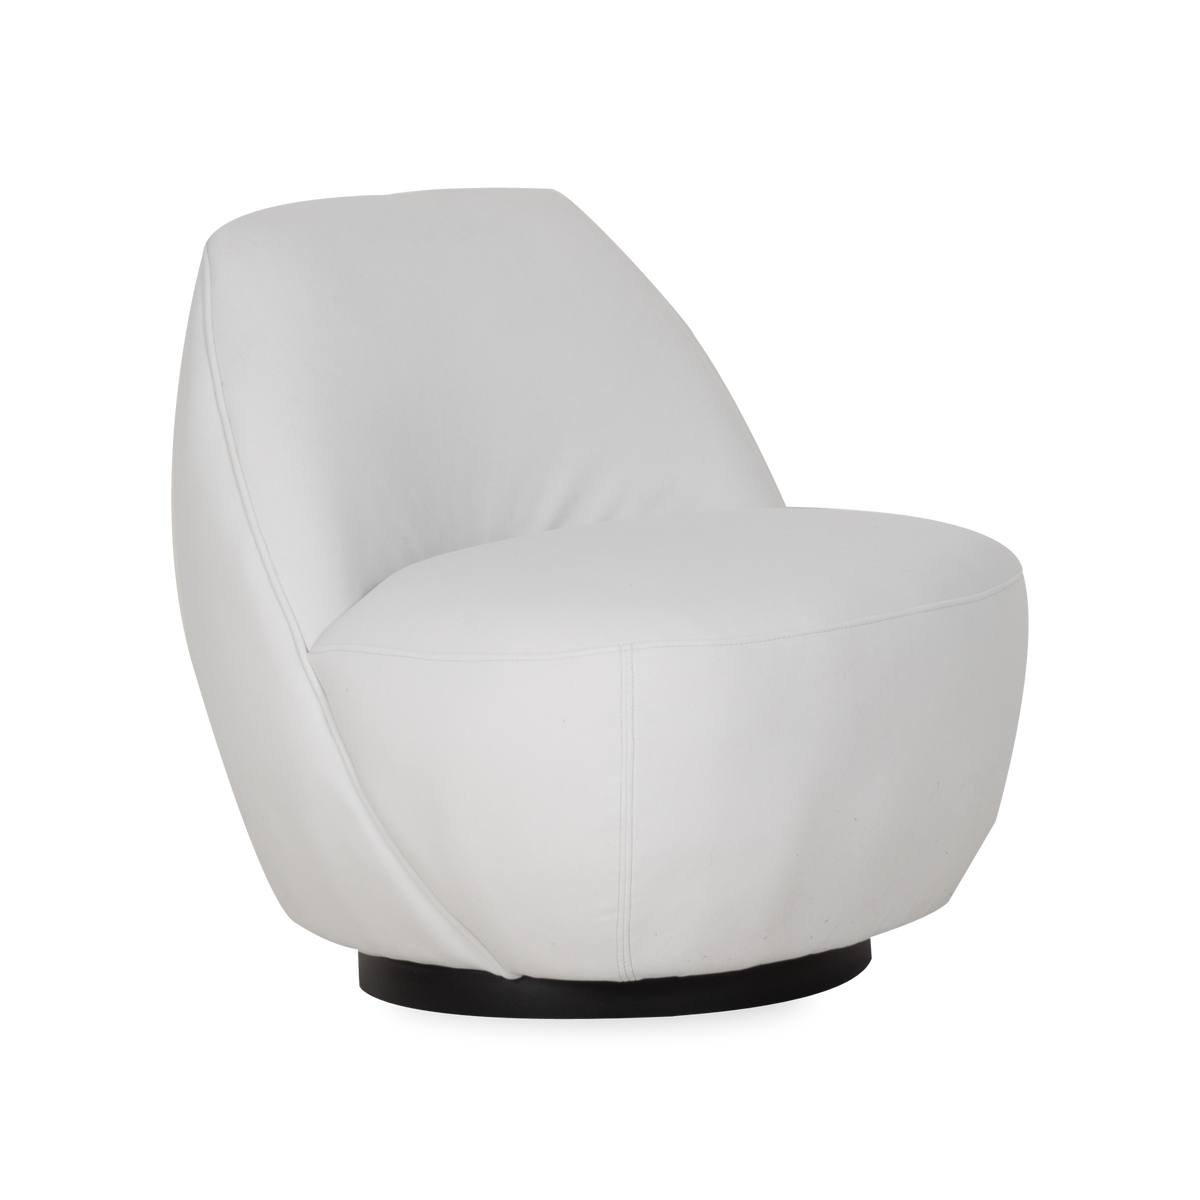 Taking cues from Italian post-modern design, the Packer Lounge Chair adds a stylish to any space.